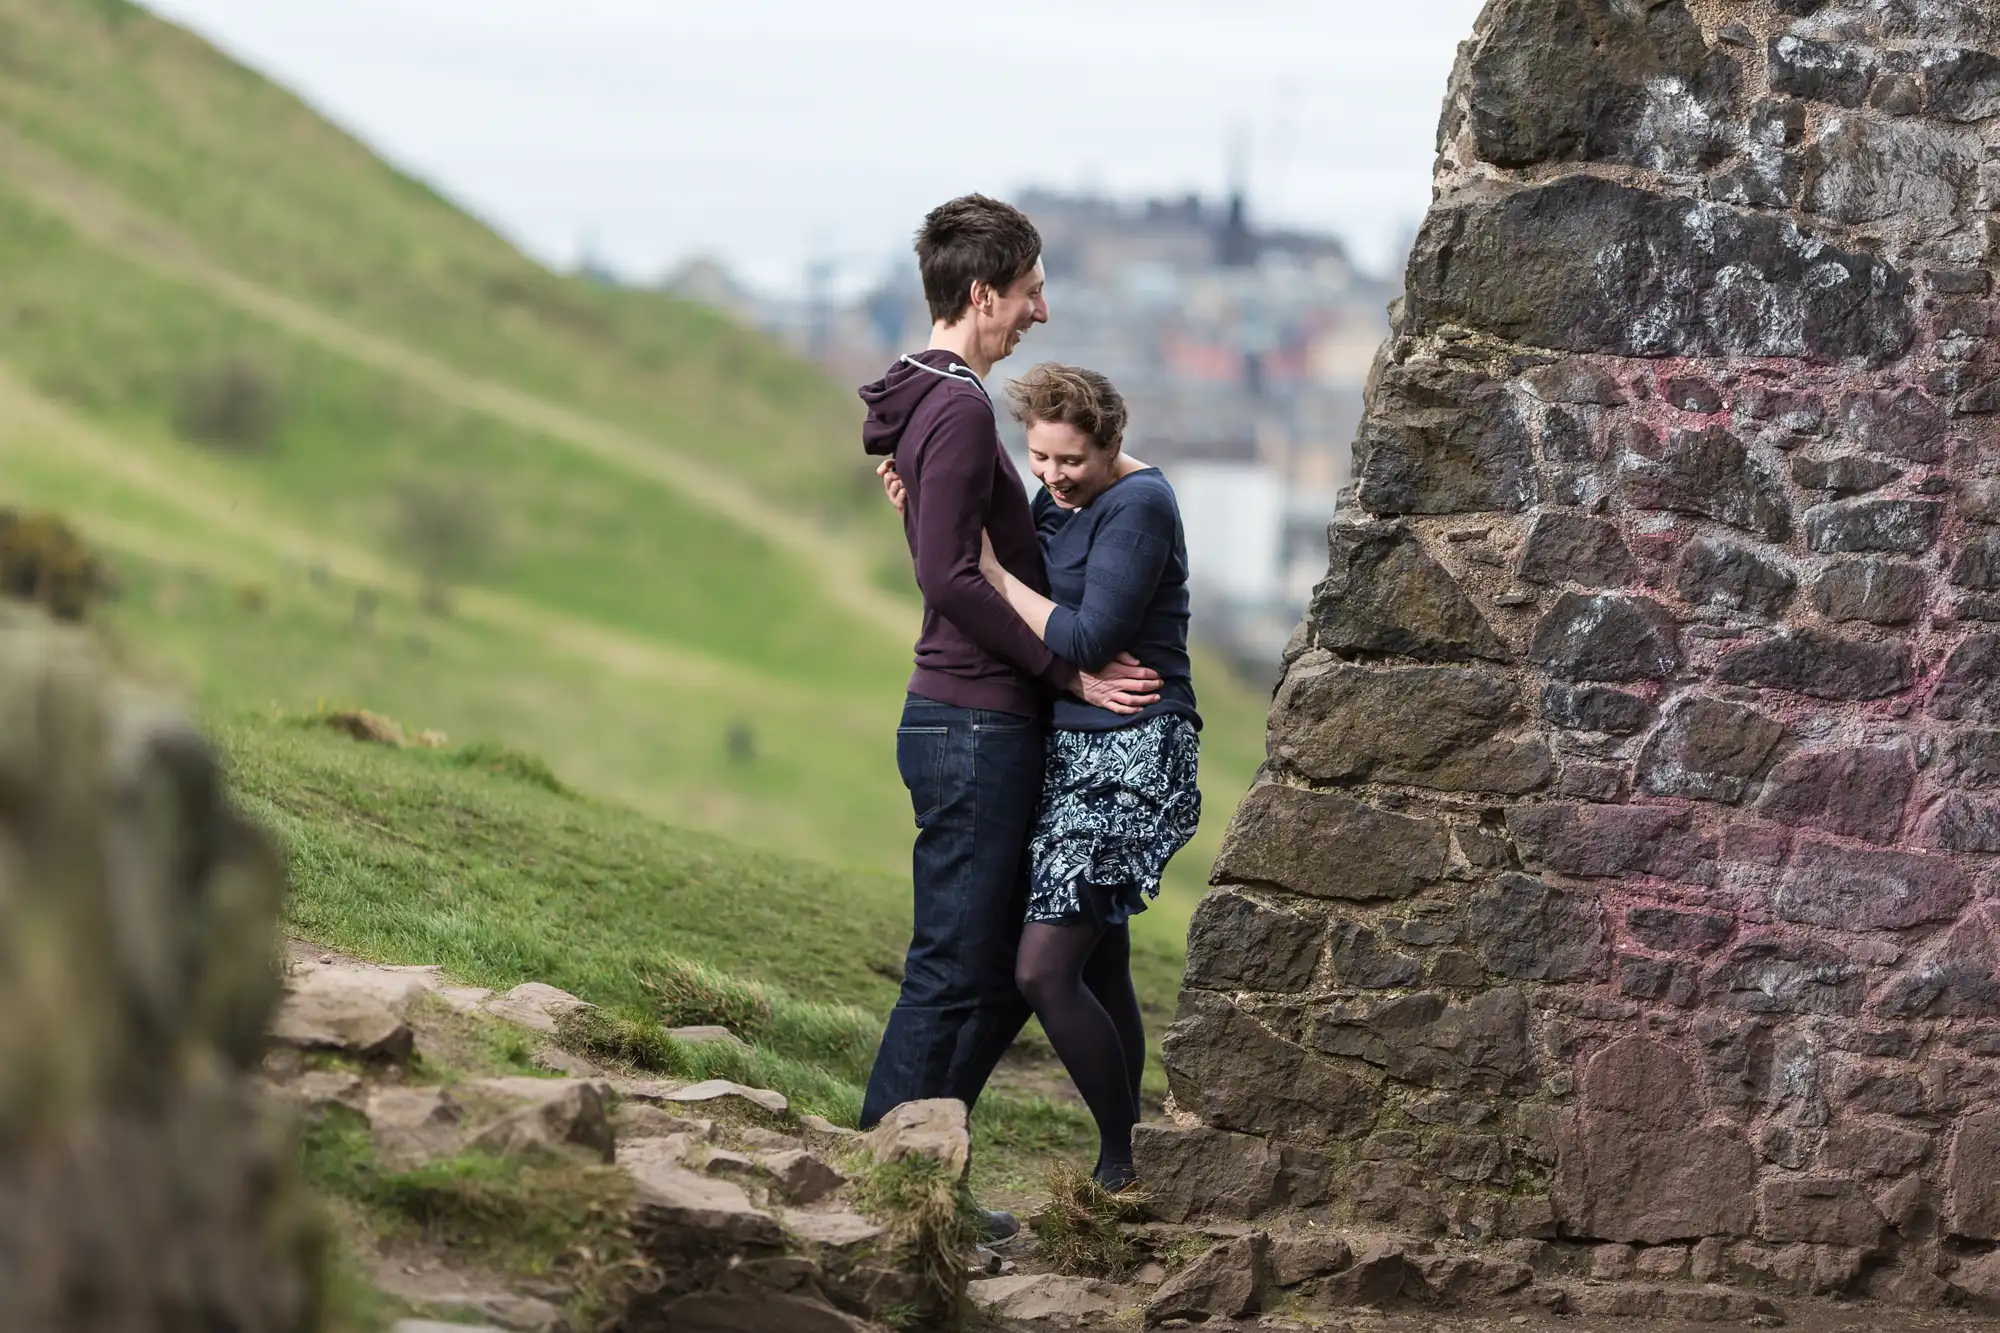 A couple embracing near a graffiti-covered stone wall, with a grassy hill and distant cityscape in the background.